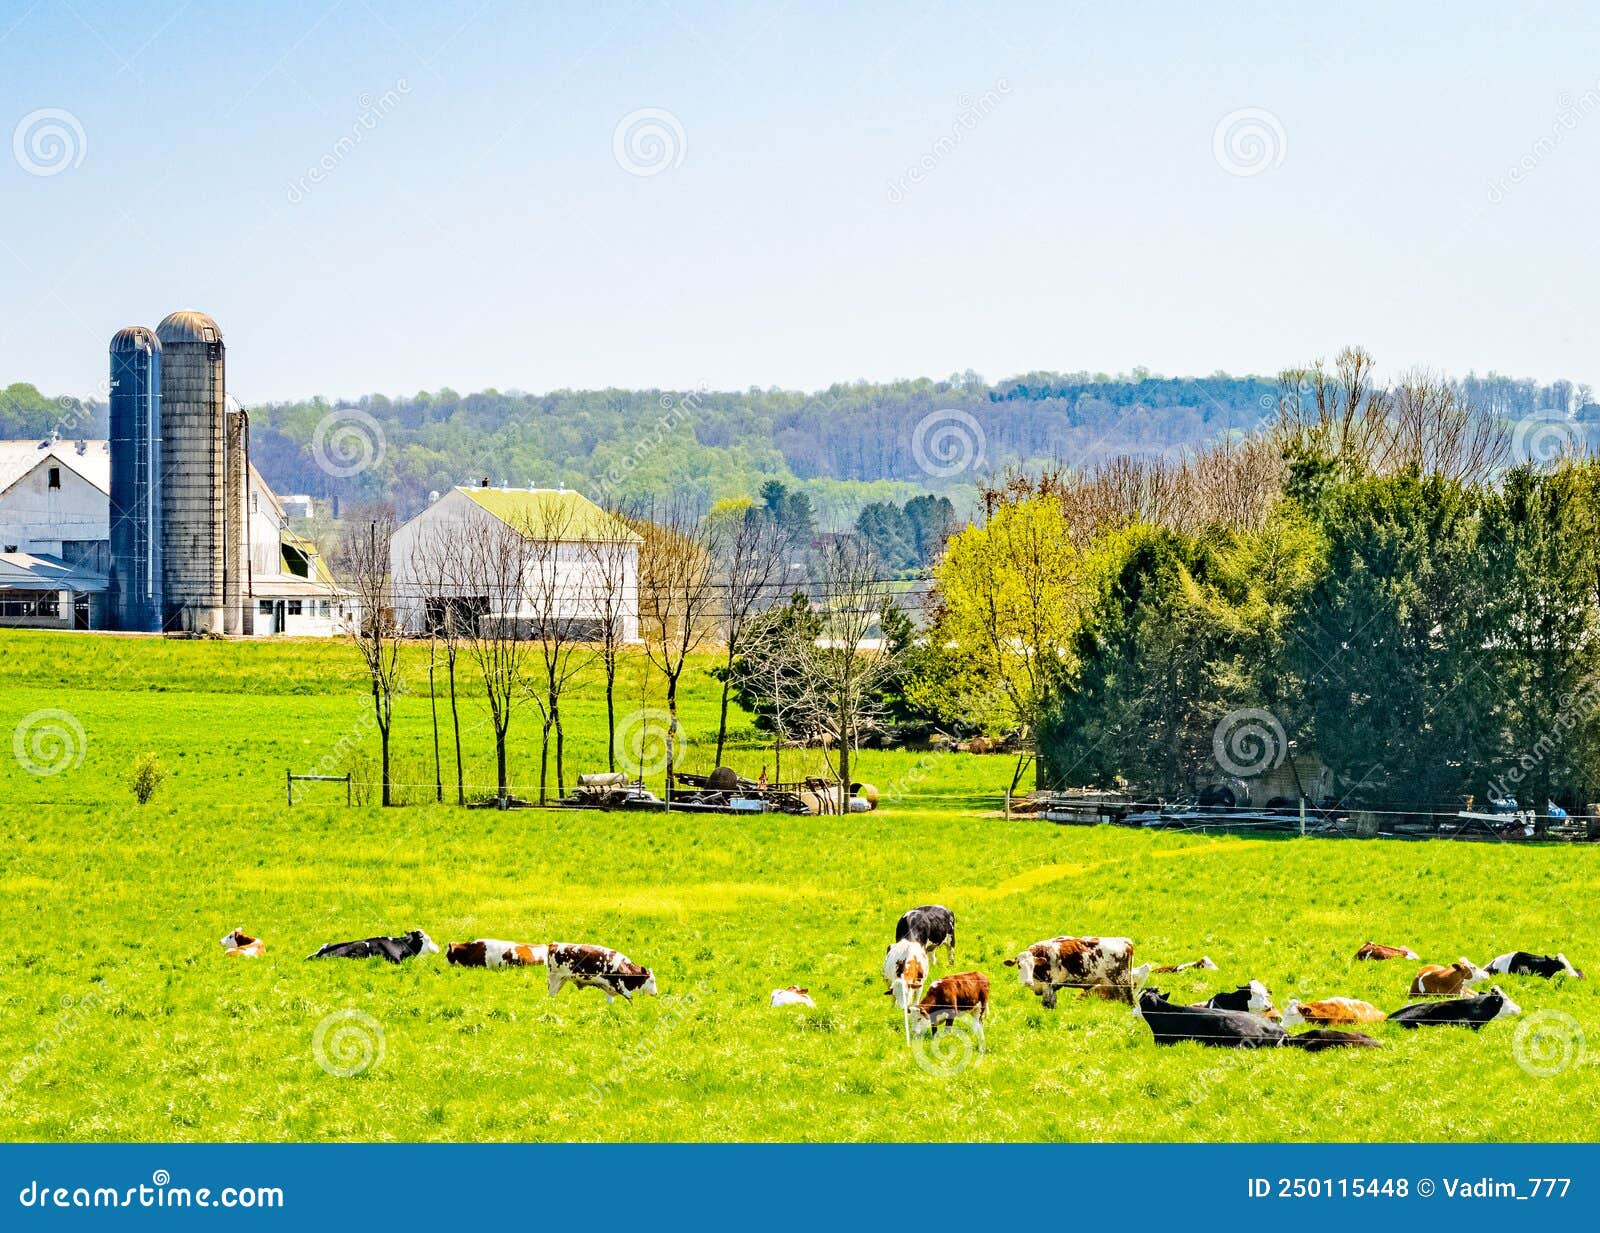 Amish Country, Grazing Cows, Farm, Home and Barn on Field Agriculture ...